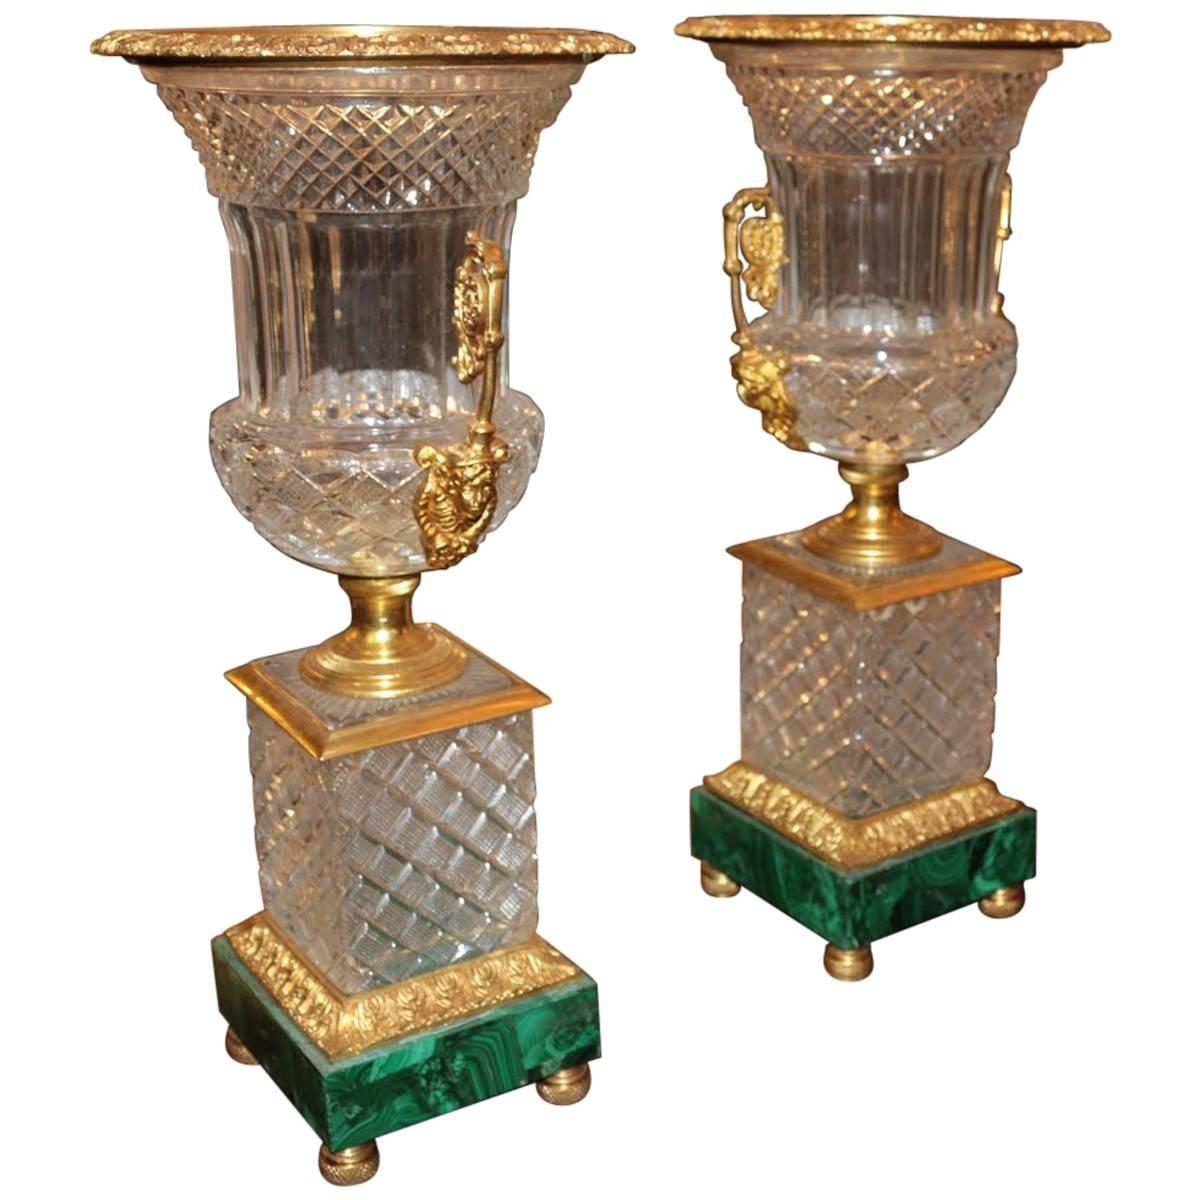 These stunning cut crystal urns are mounted on ornate bronze with dark green malachite bases. Their neoclassical styling and sumptuous details would make for incredible mantel ornaments. Raised on malachite base. Sold in a set of two.